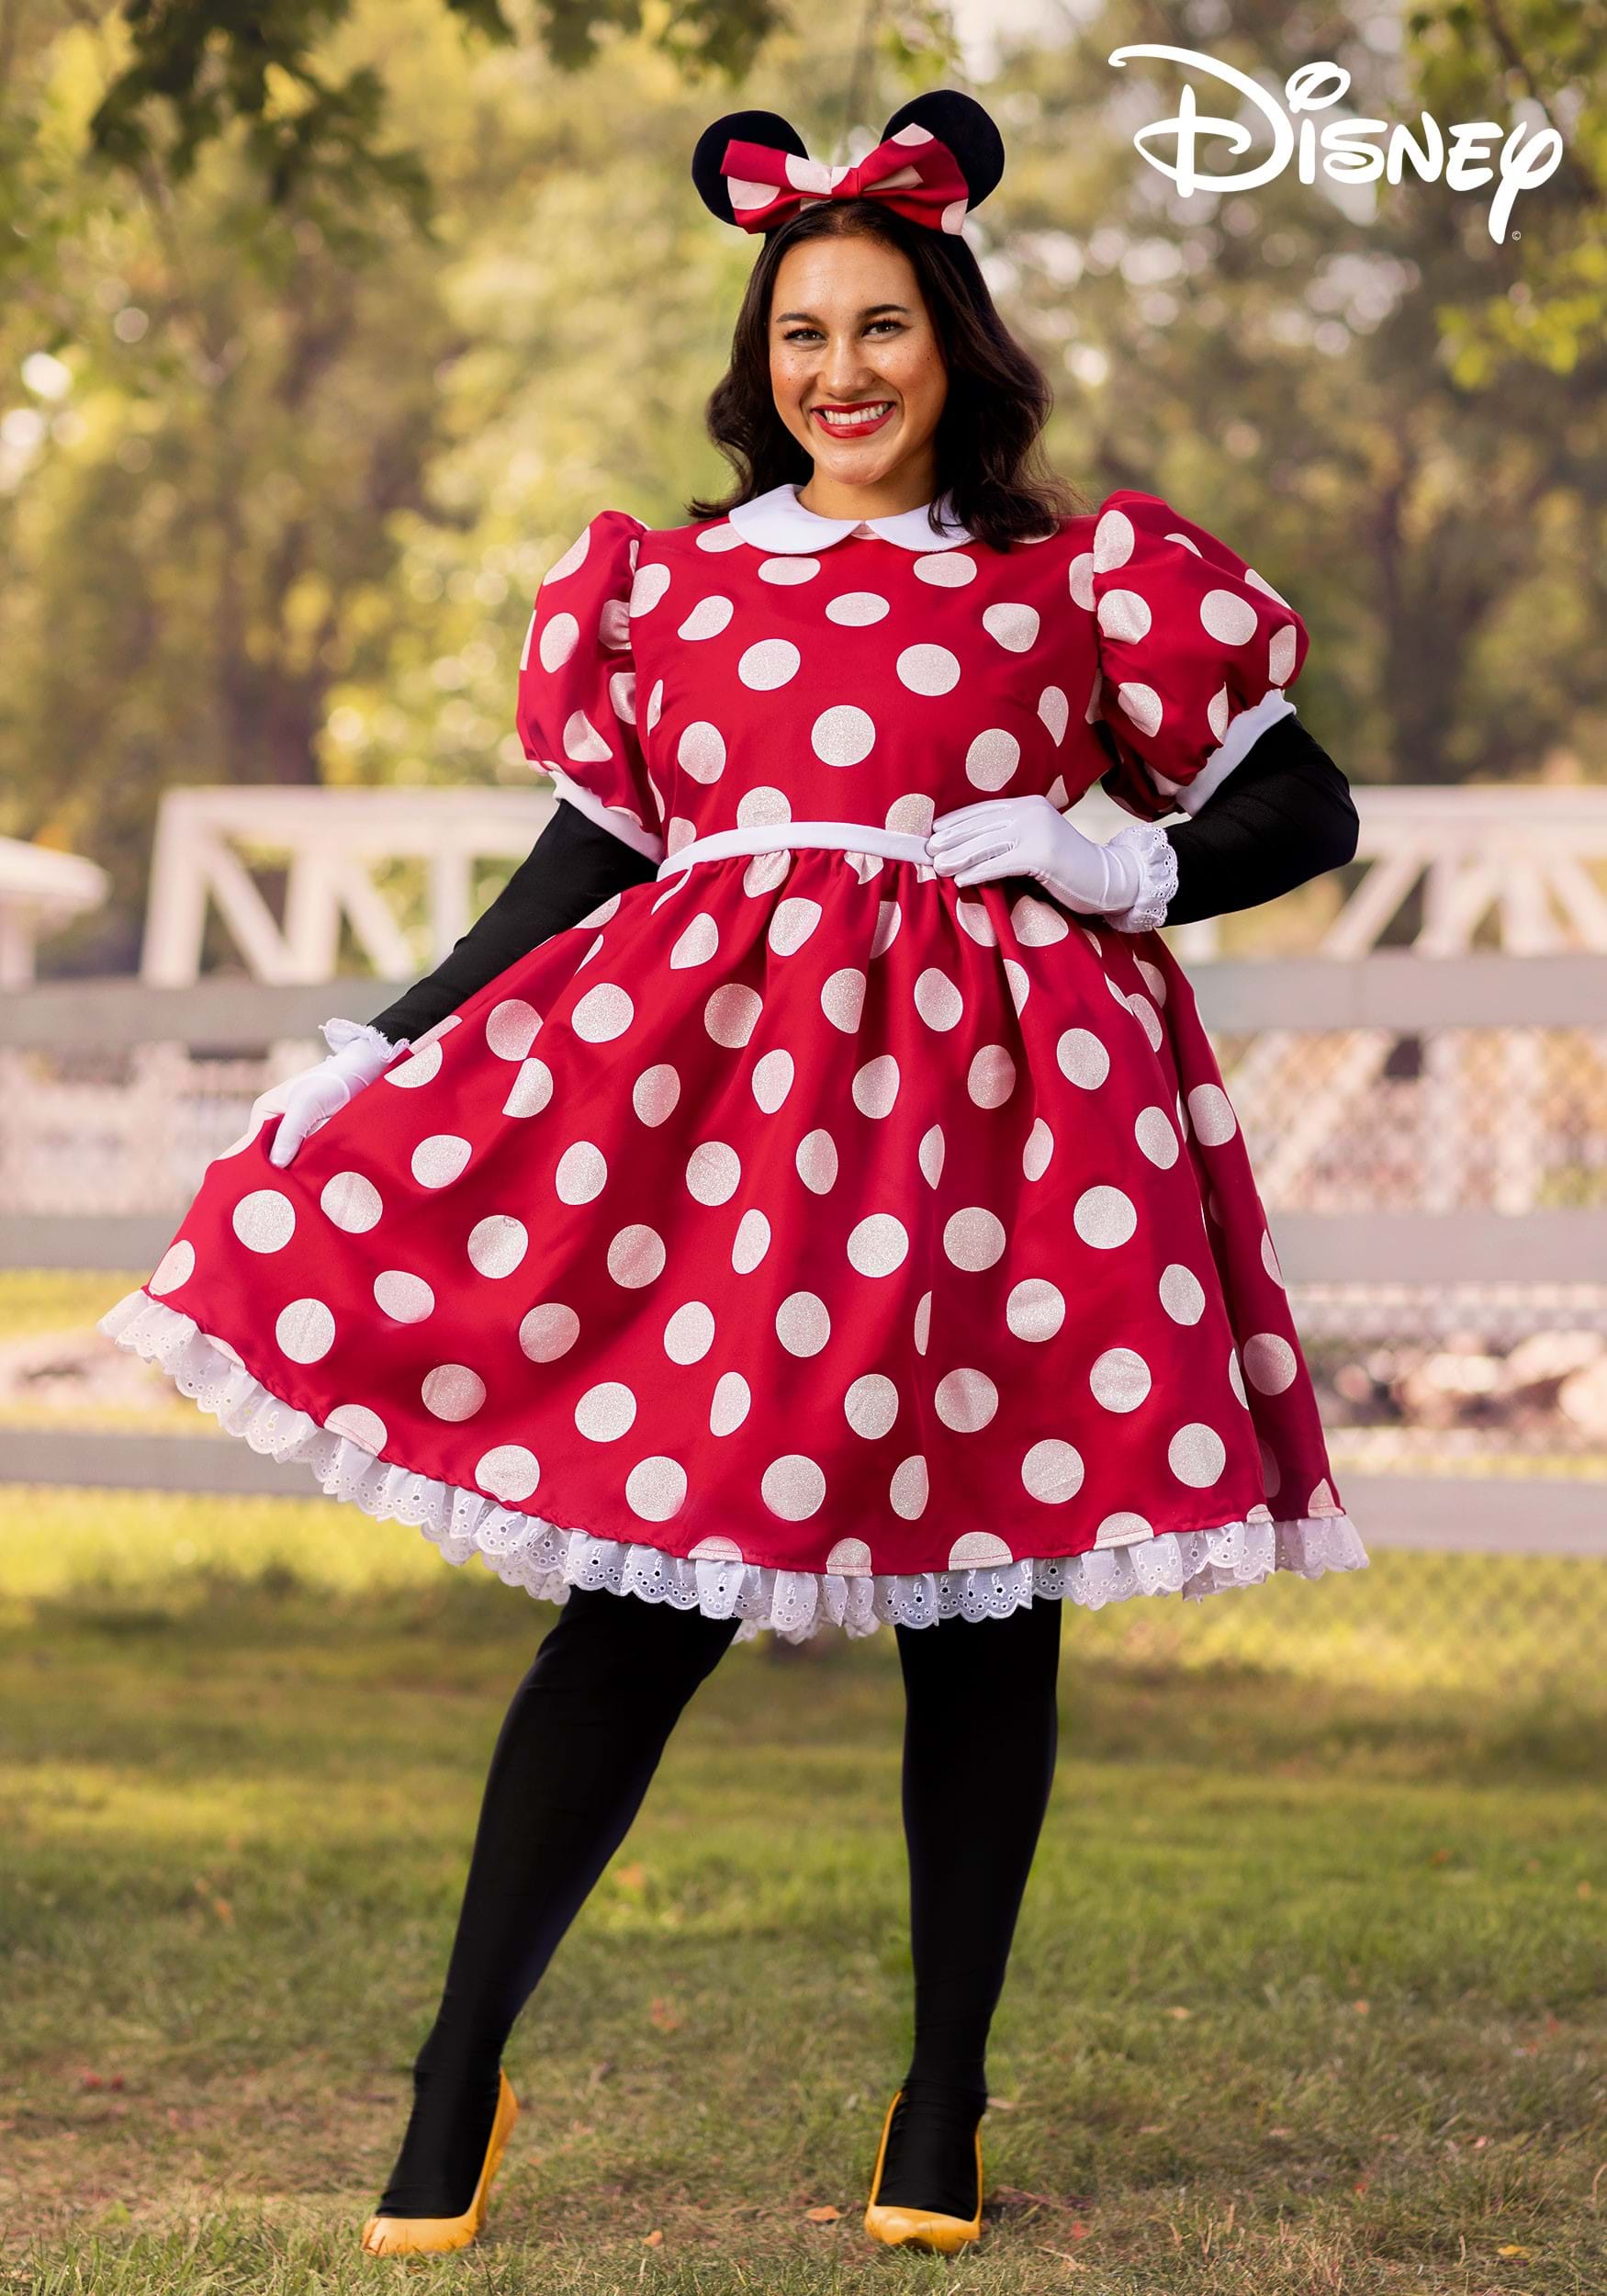 Plus Size Deluxe Minnie Mouse Costume for Women